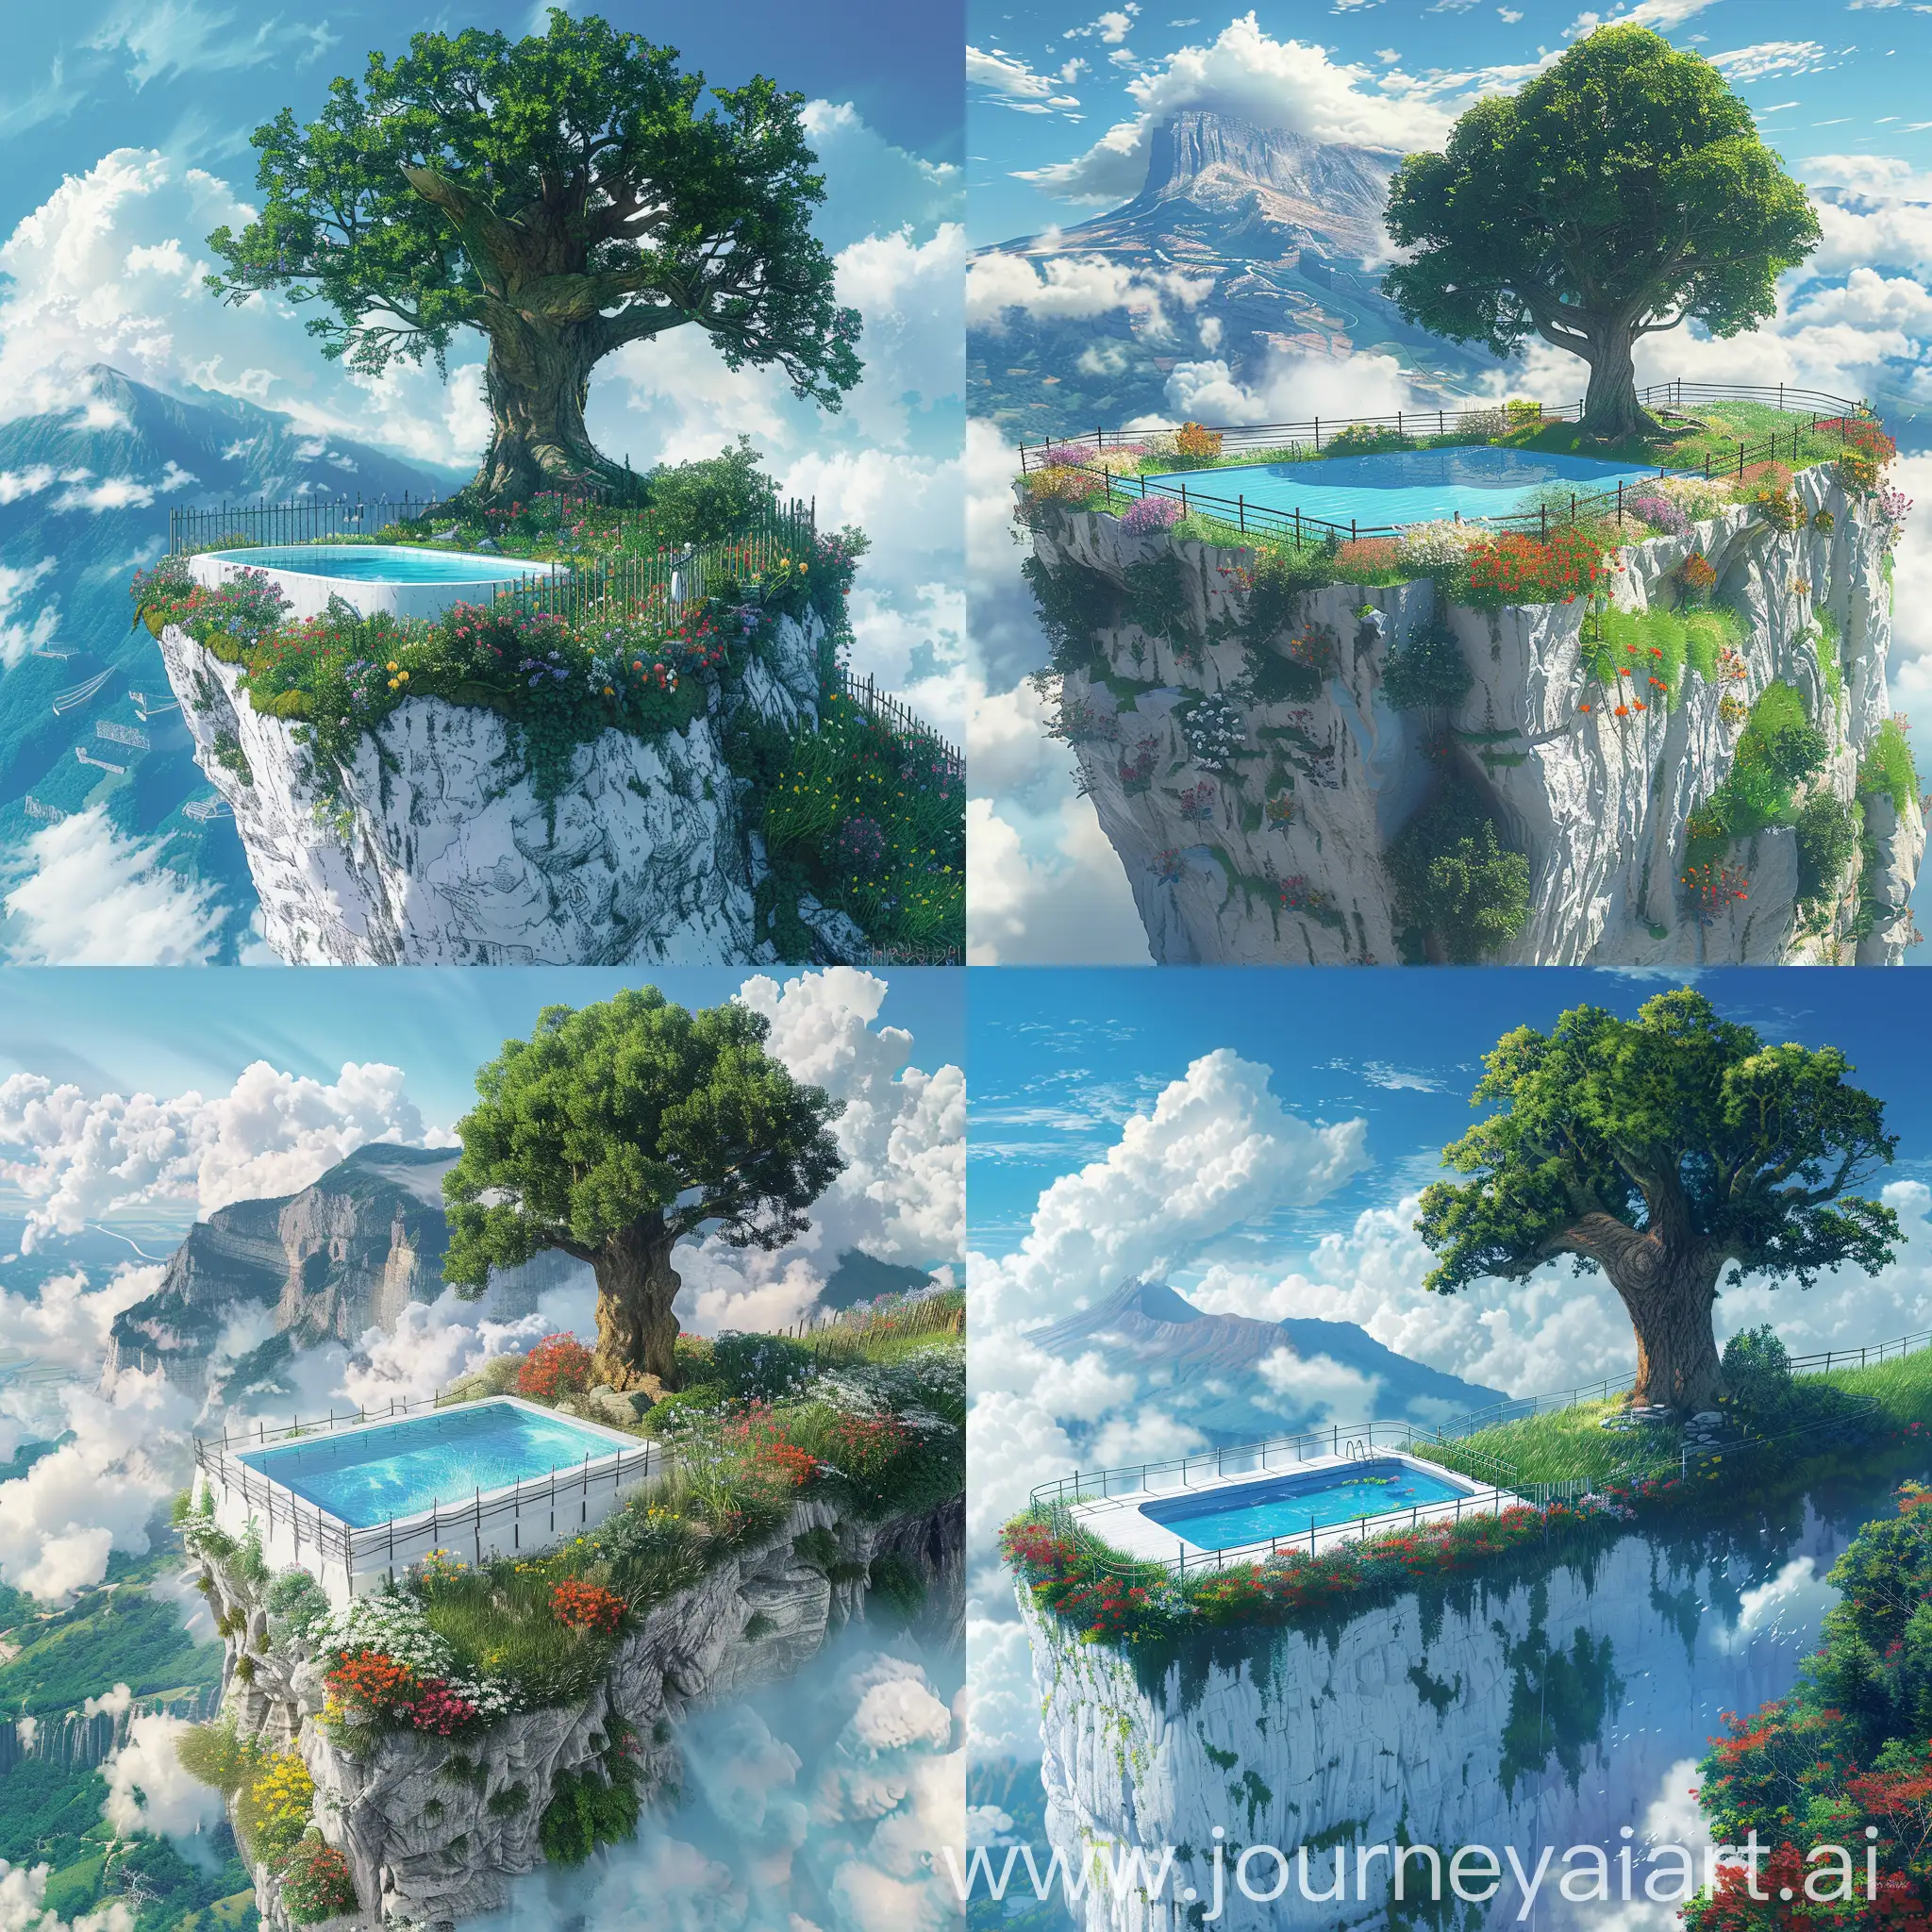 Ghibli-Anime-Style-Tranquil-Swimming-Pool-and-Towering-Oak-Tree-on-White-Cliff-Overlooking-Foggy-Mountains